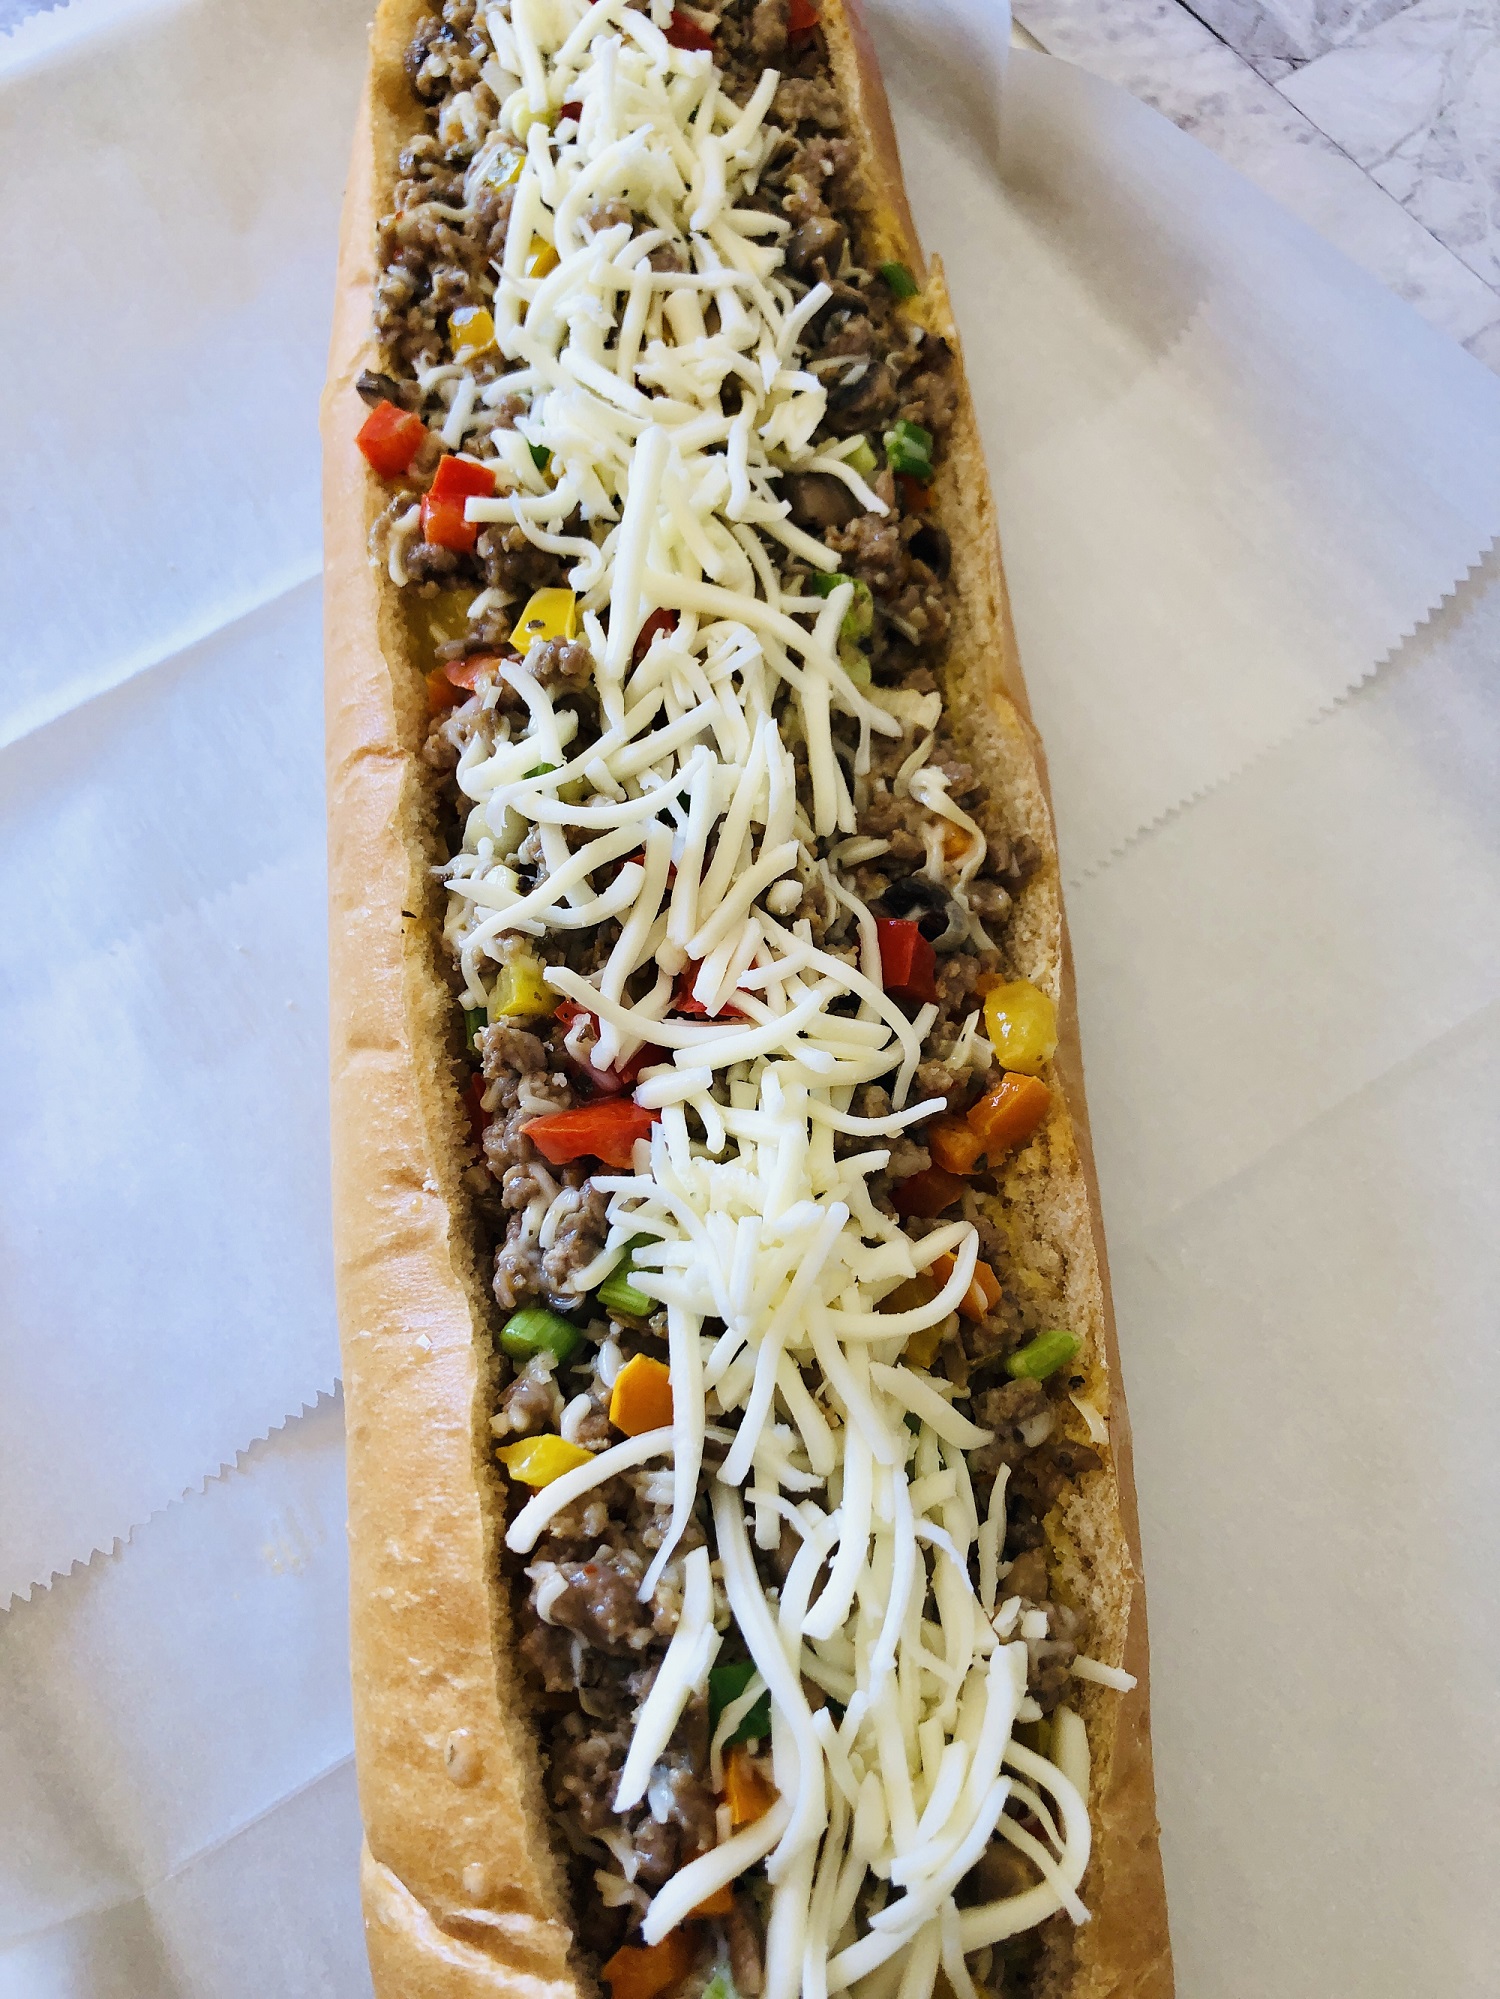 A baguette filled with Italian sausage mixture.